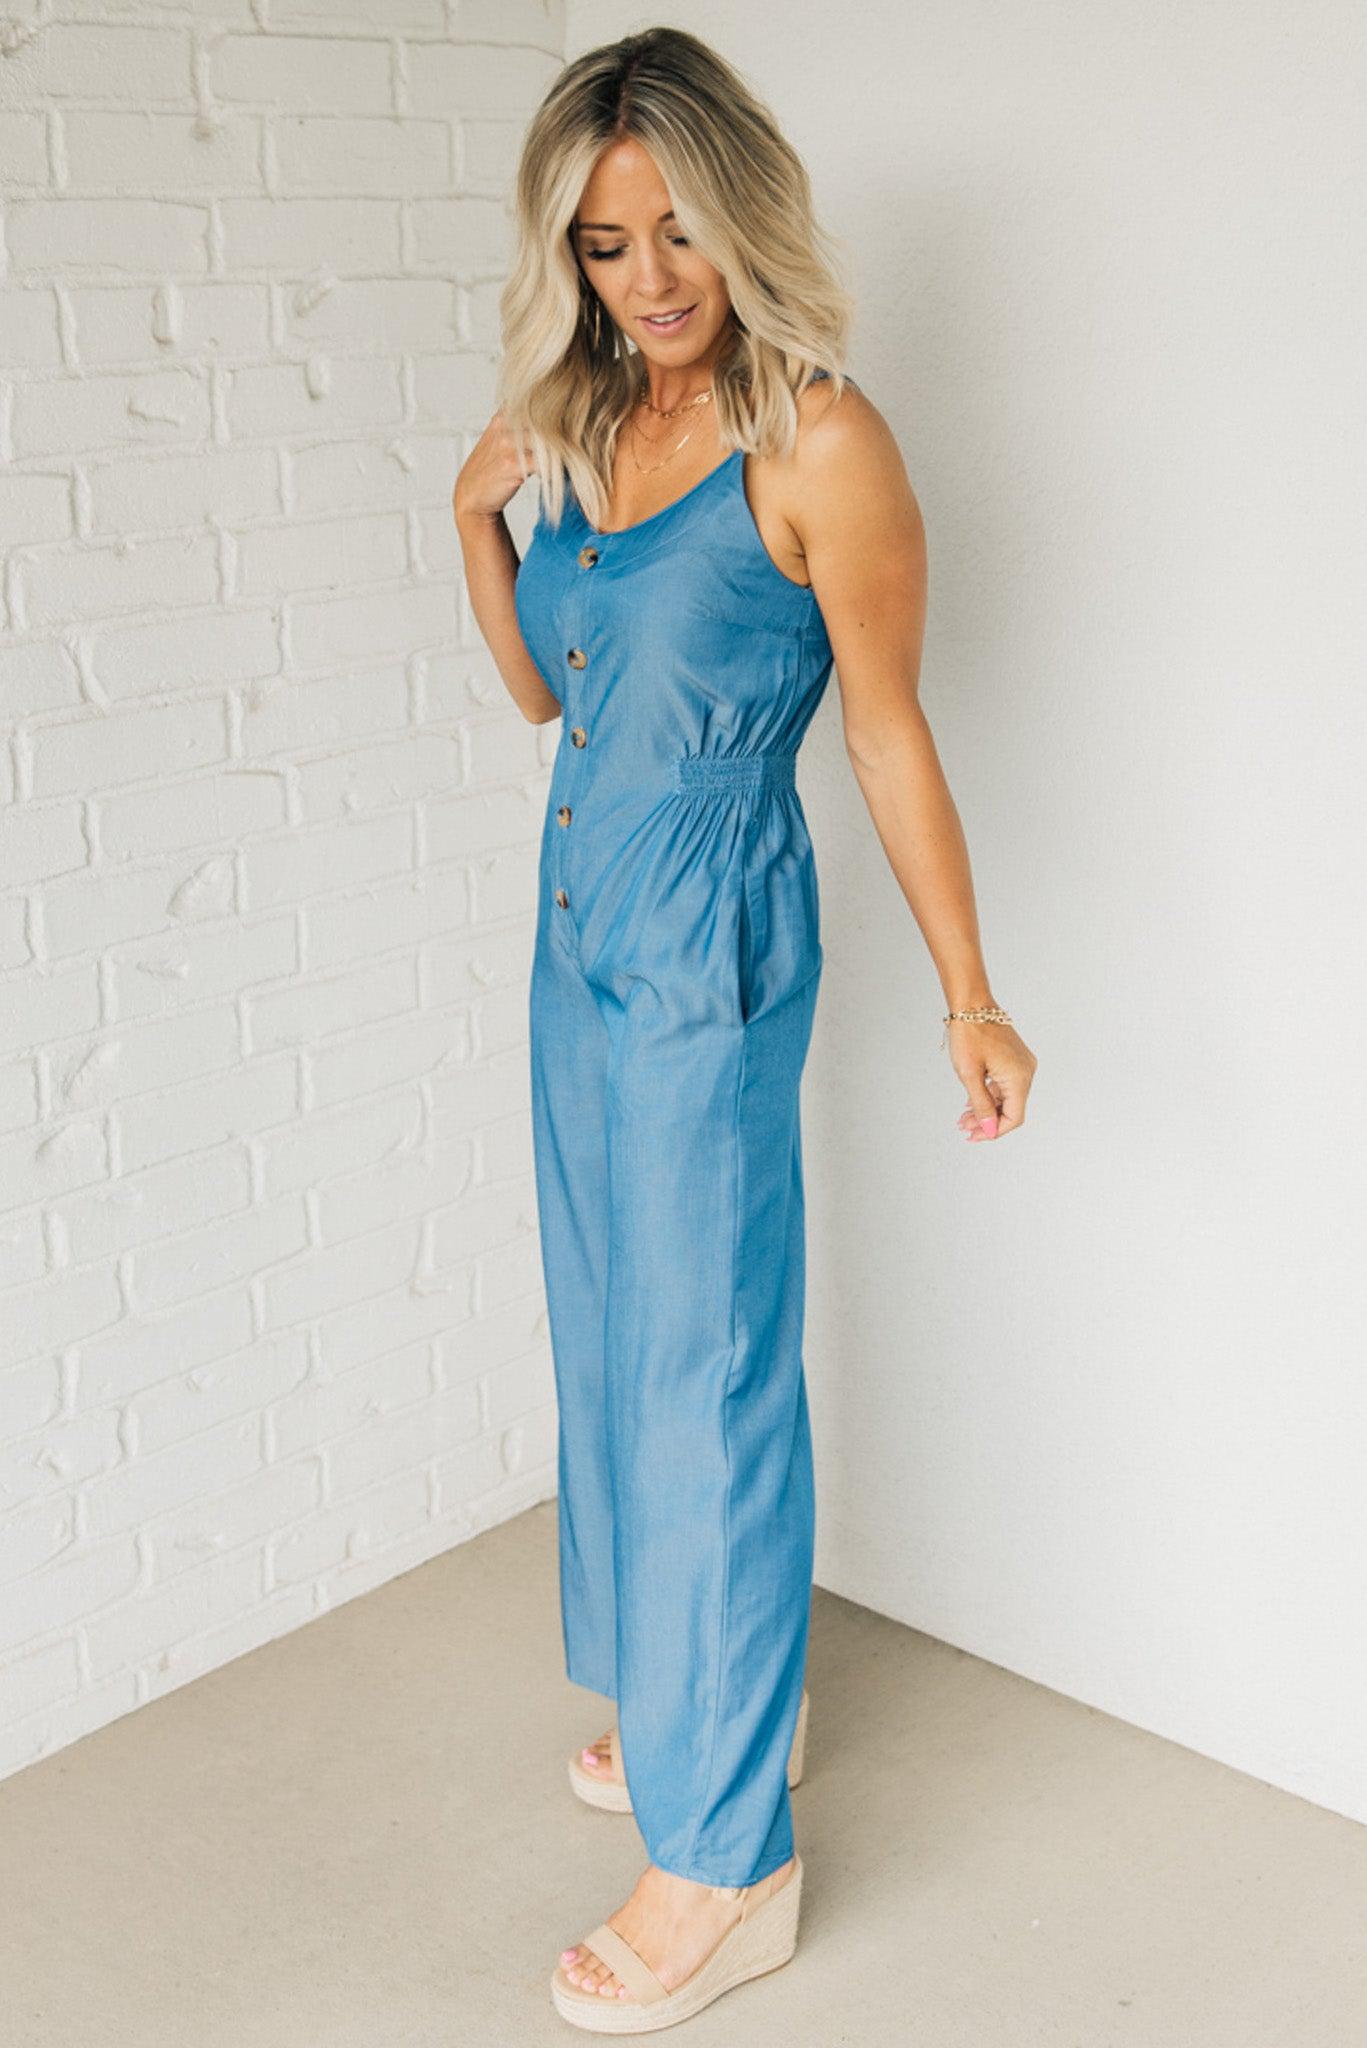 Lucky To Have You Chambray Jumpsuit • Impressions Online Boutique